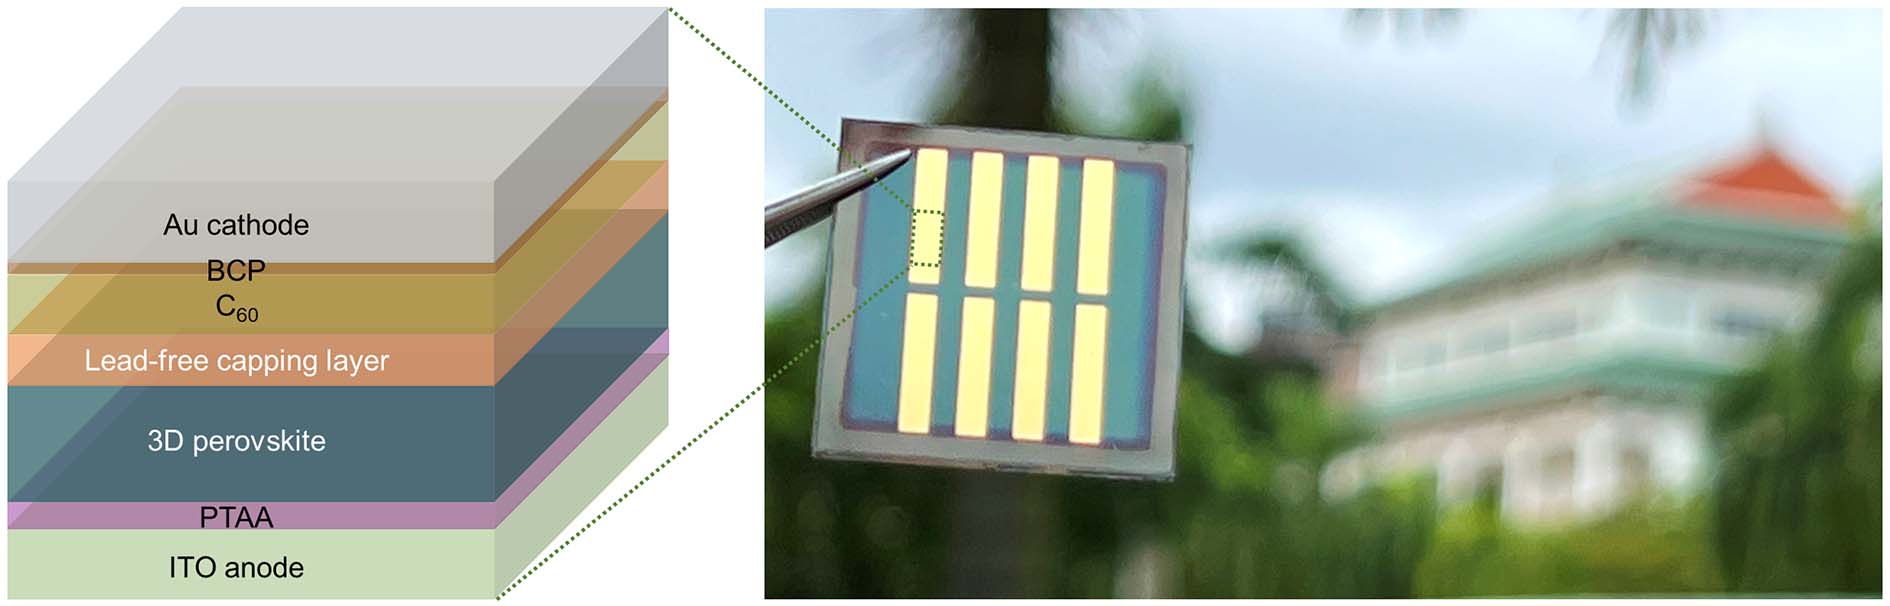 Prototype perovskite solar panel capped with the zinc-based compound. 